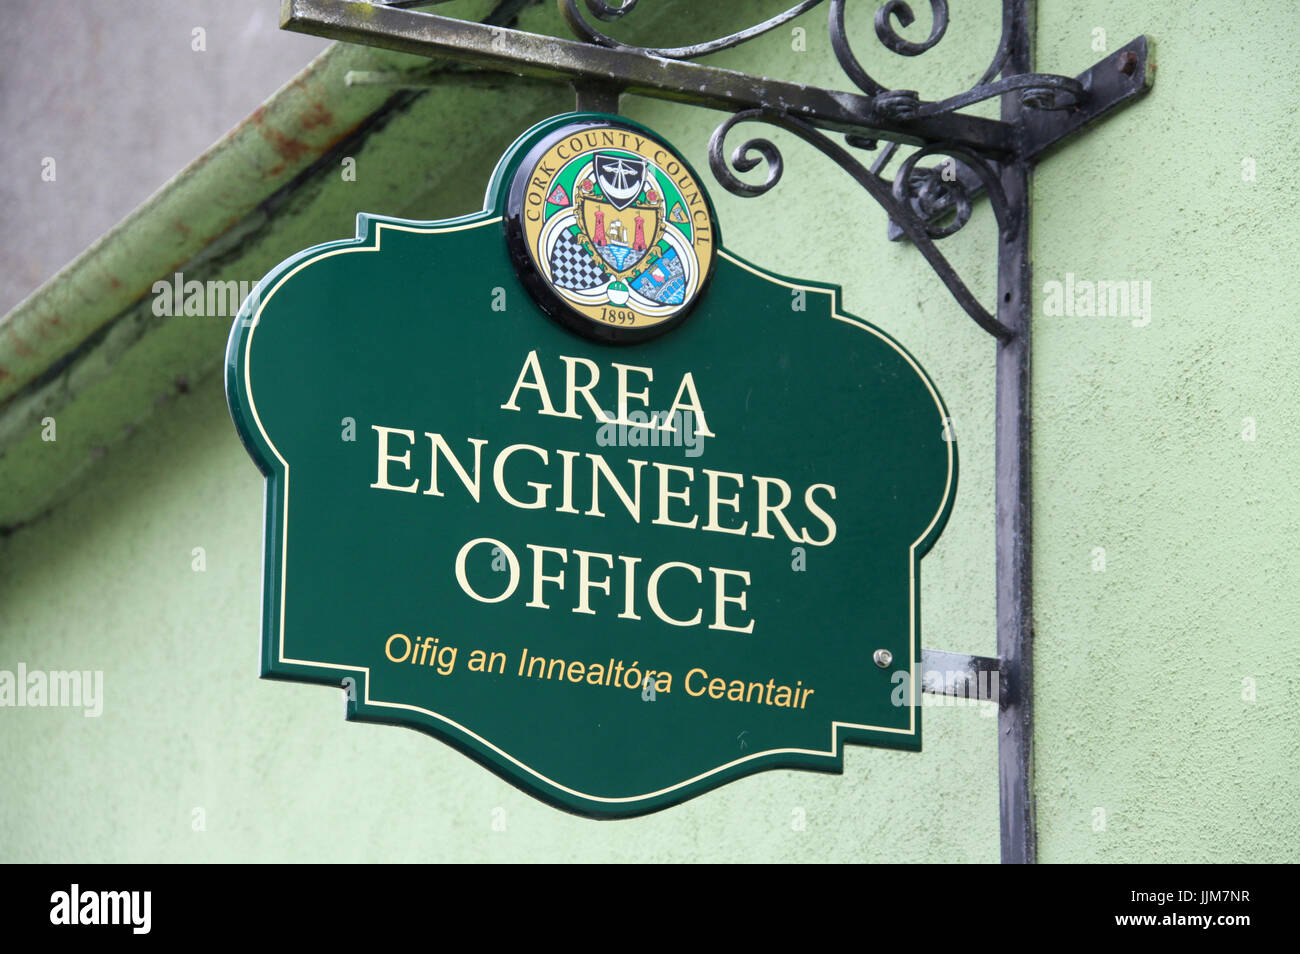 Area engineers office for Cork County Council in Clonakilty Stock Photo